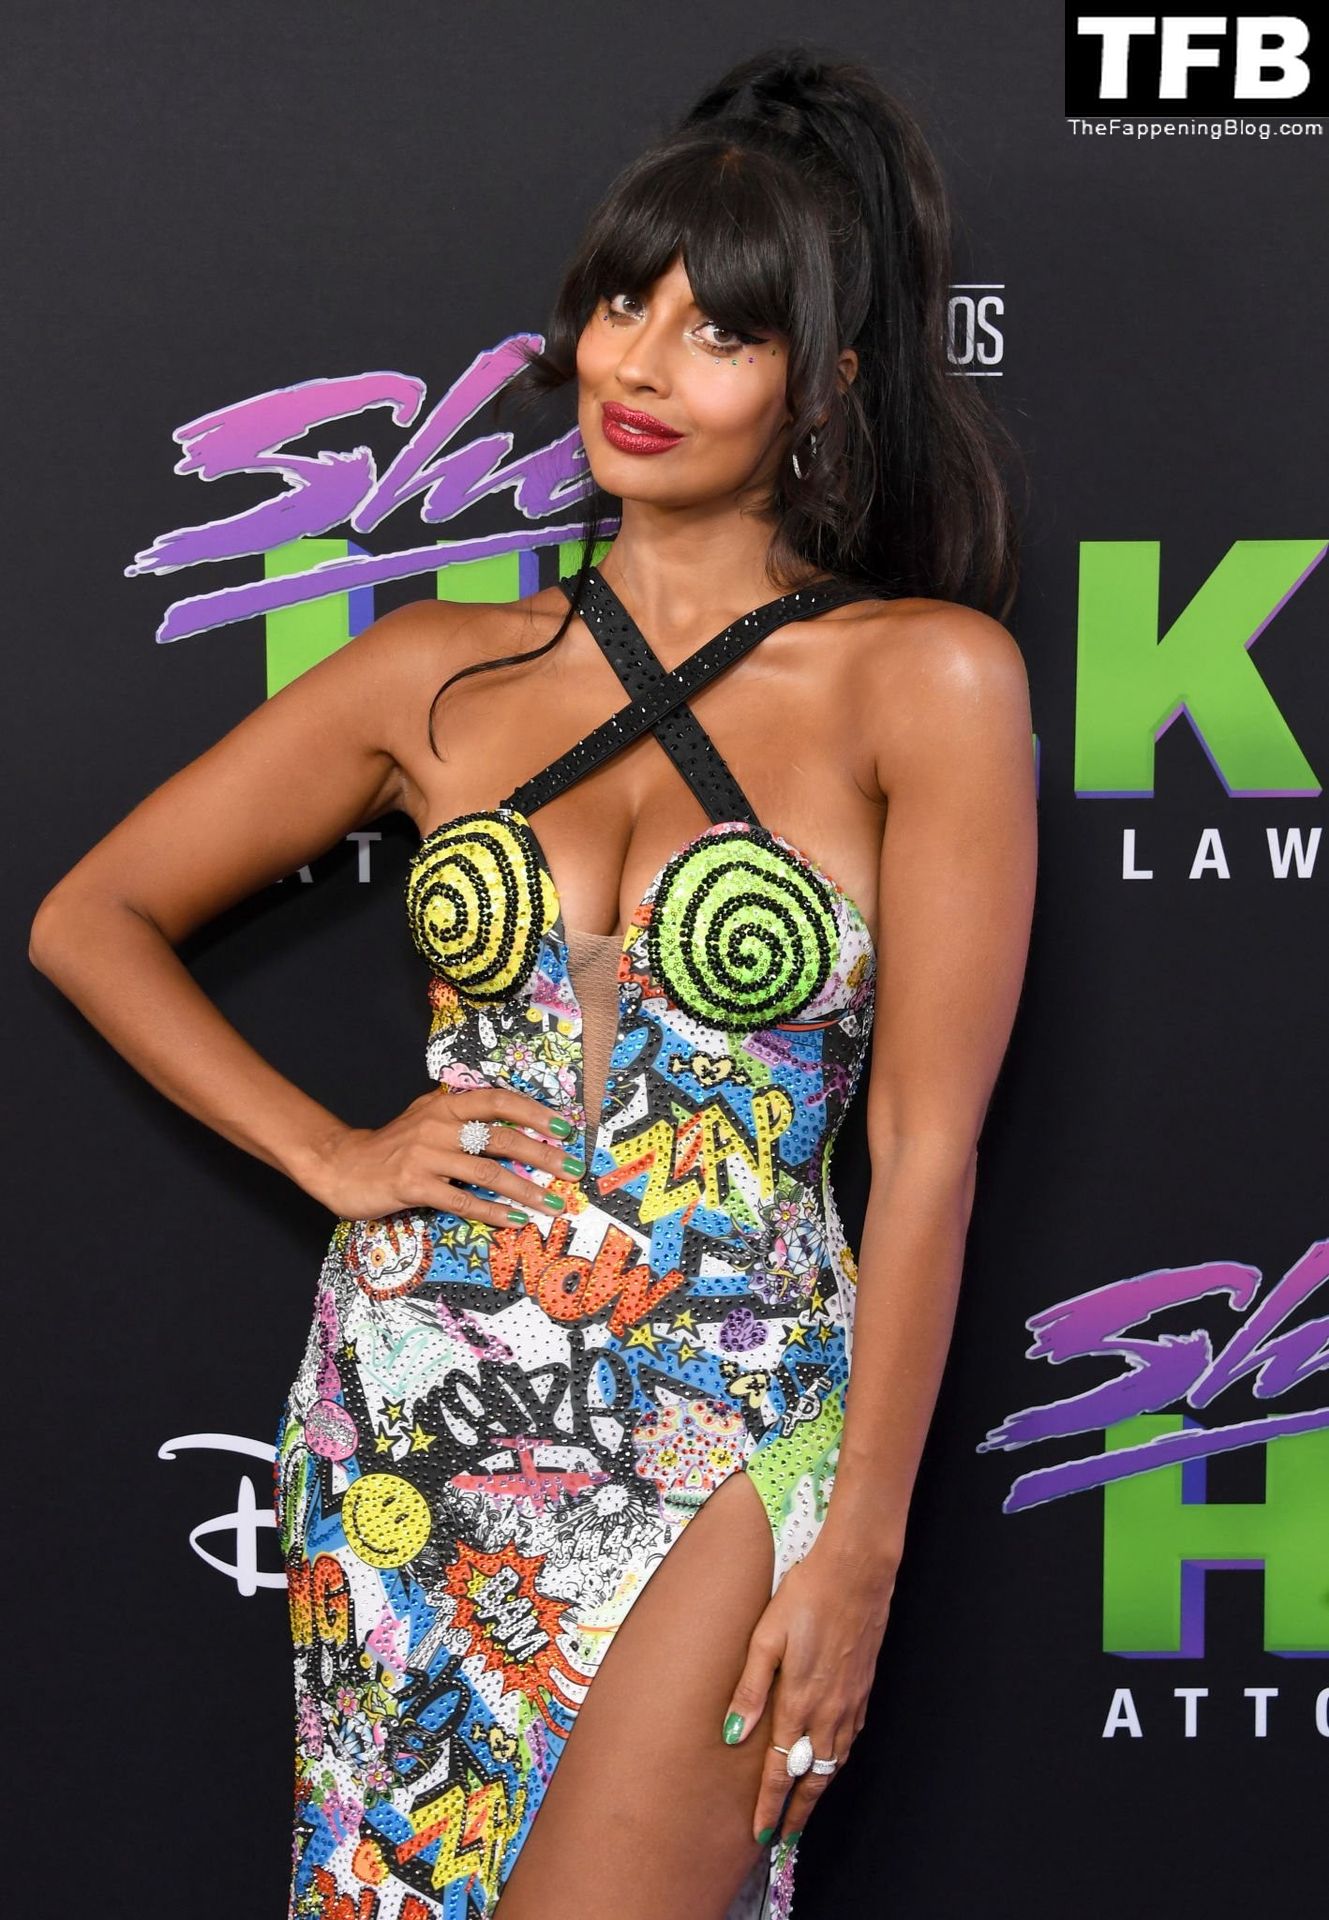 Jameela Jamil Sexy The Fappening Blog 11 - Jameela Jamil Flaunts Her Big Tits at the Premiere of Disney+’s “She Hulk: Attorney at Law” in LA (53 Photos)